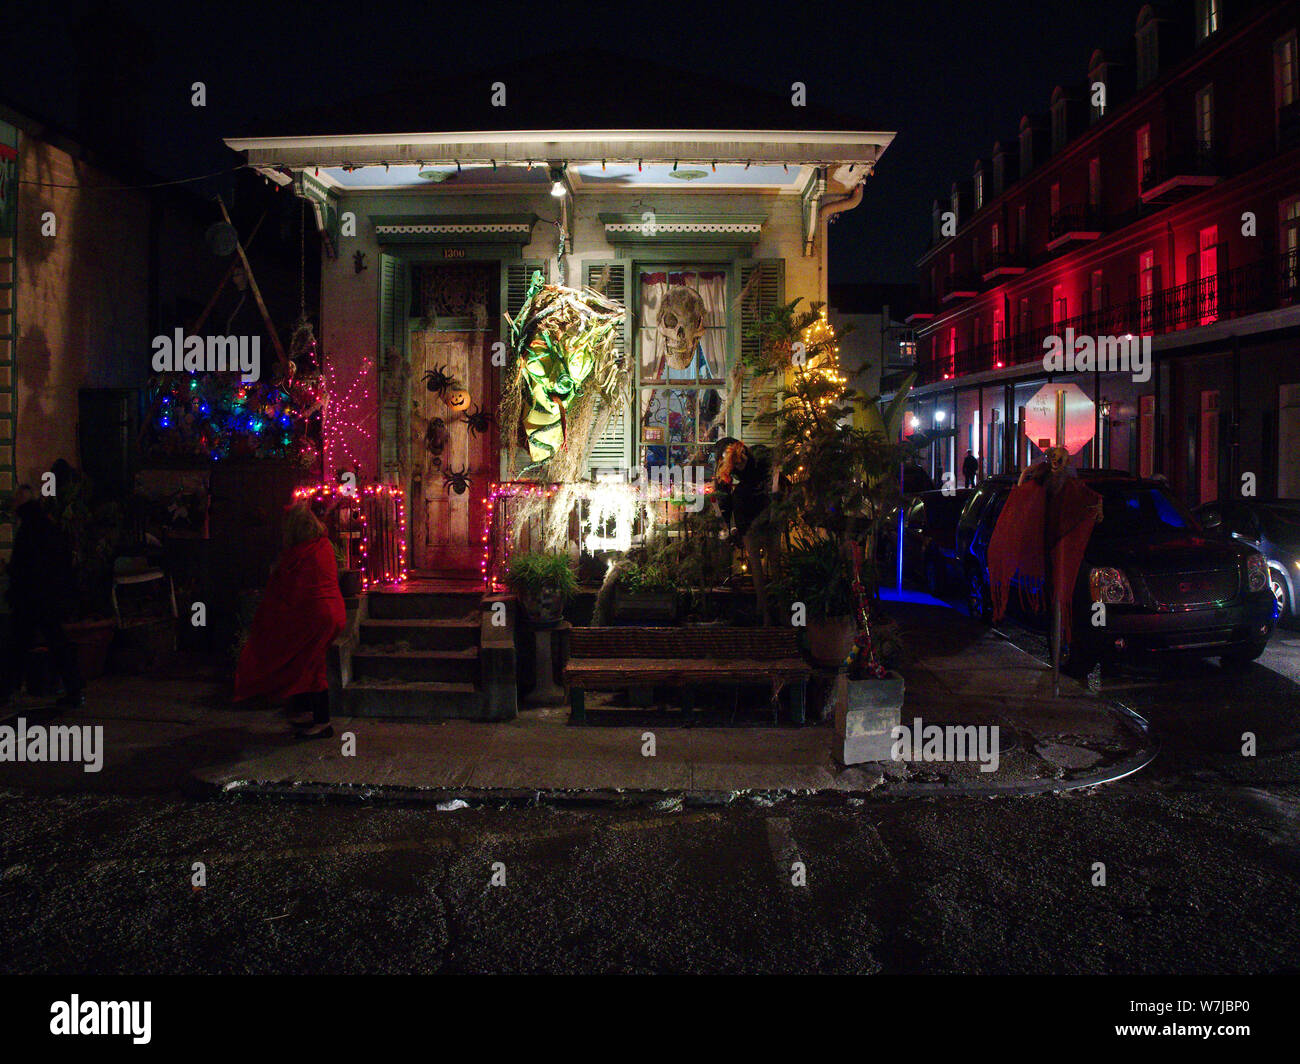 New Orleans, Louisiana, USA - October 31, 2018: A woman wearing a costume walks in front of a decorated house on Halloween night. Stock Photo